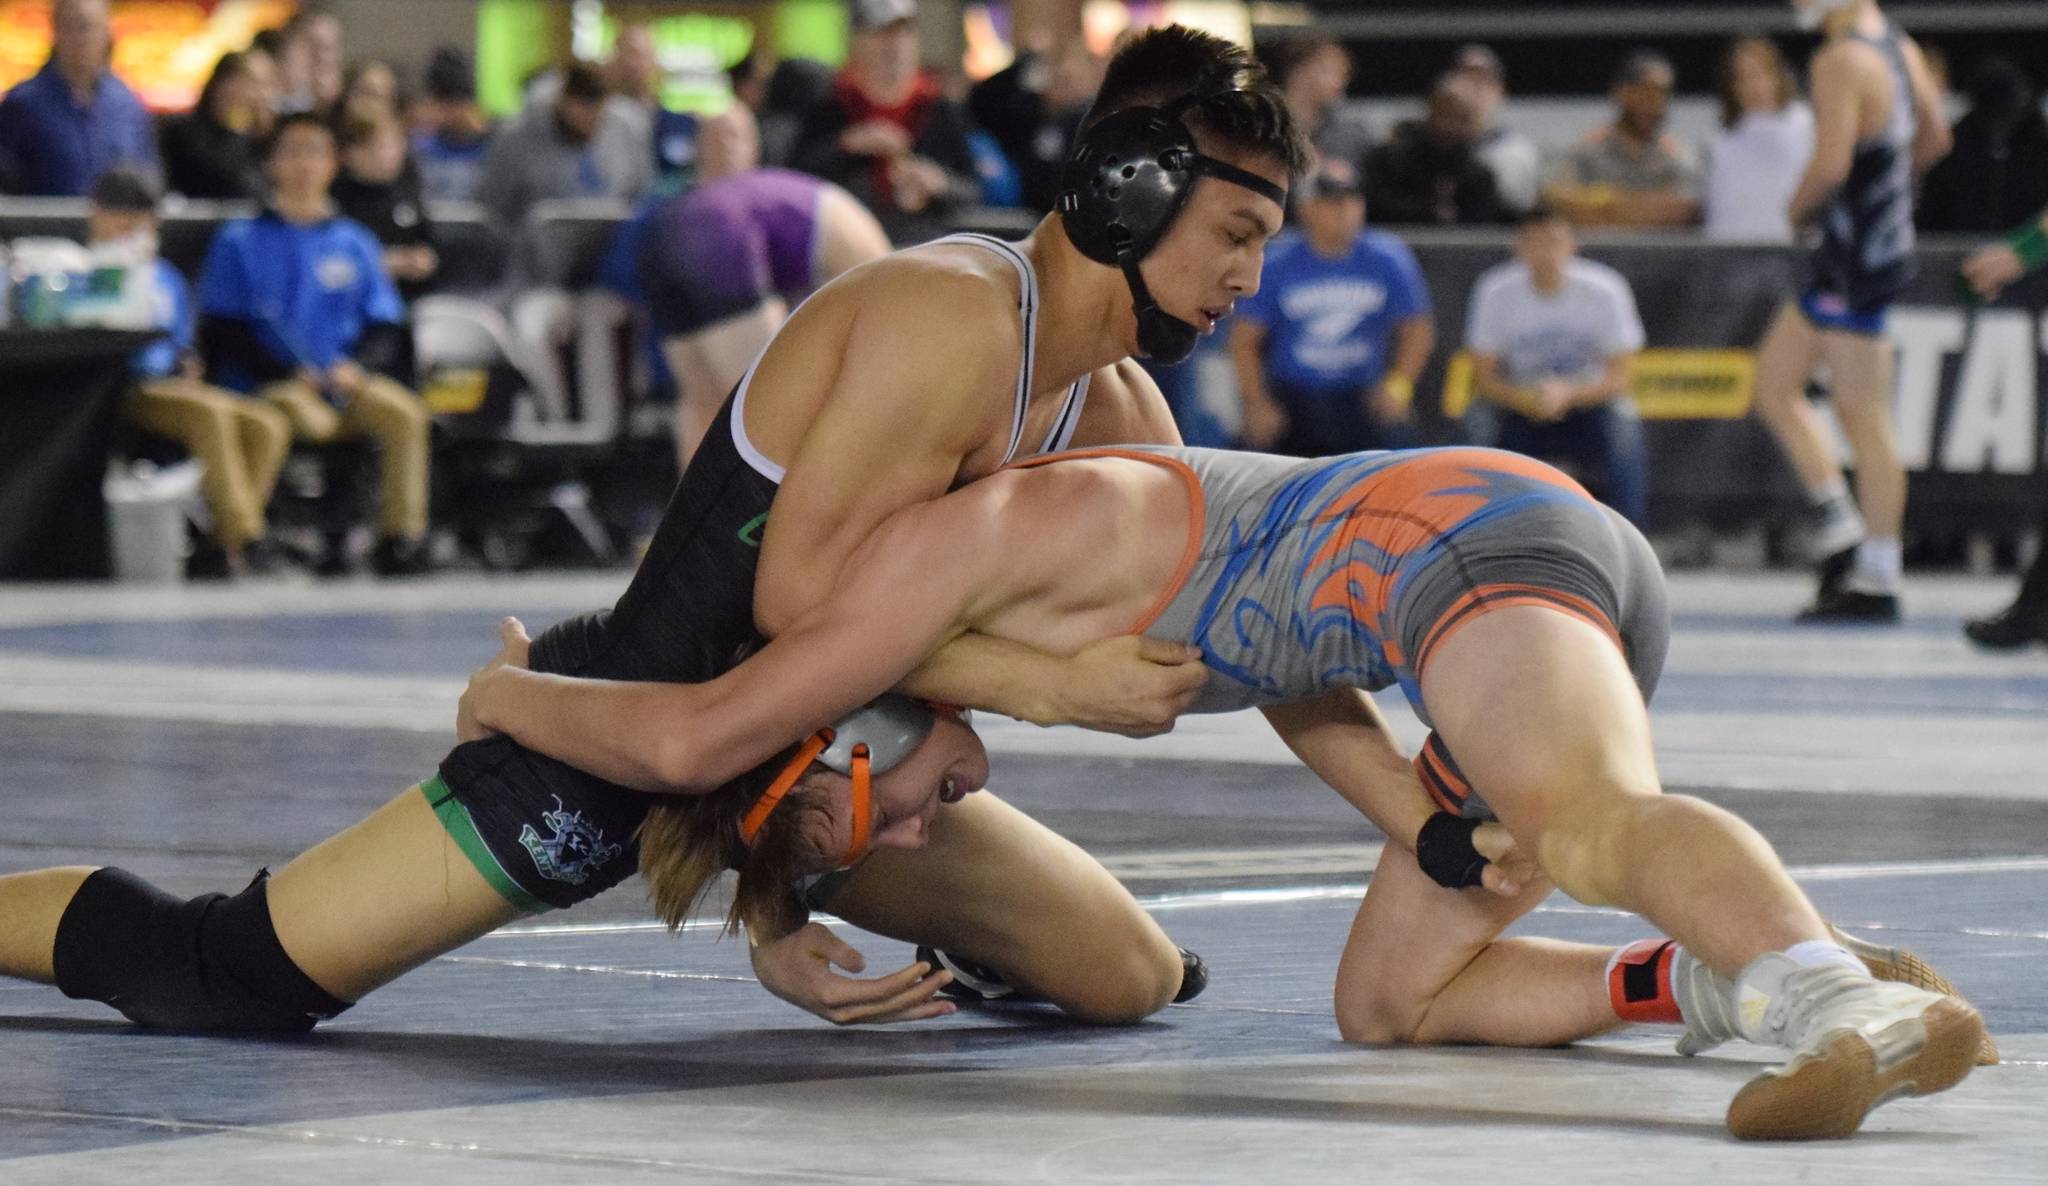 Kentwood’s Alex Long, top, battles Auburn Mountainview’s Brennen Hanson during their 152-pound semifinal at Mat Classic XXXI at the Tacoma Dome on Saturday. Long pulled out a 4-3 decision to reach the final. RACHEL CIAMPI, Kent Reporter